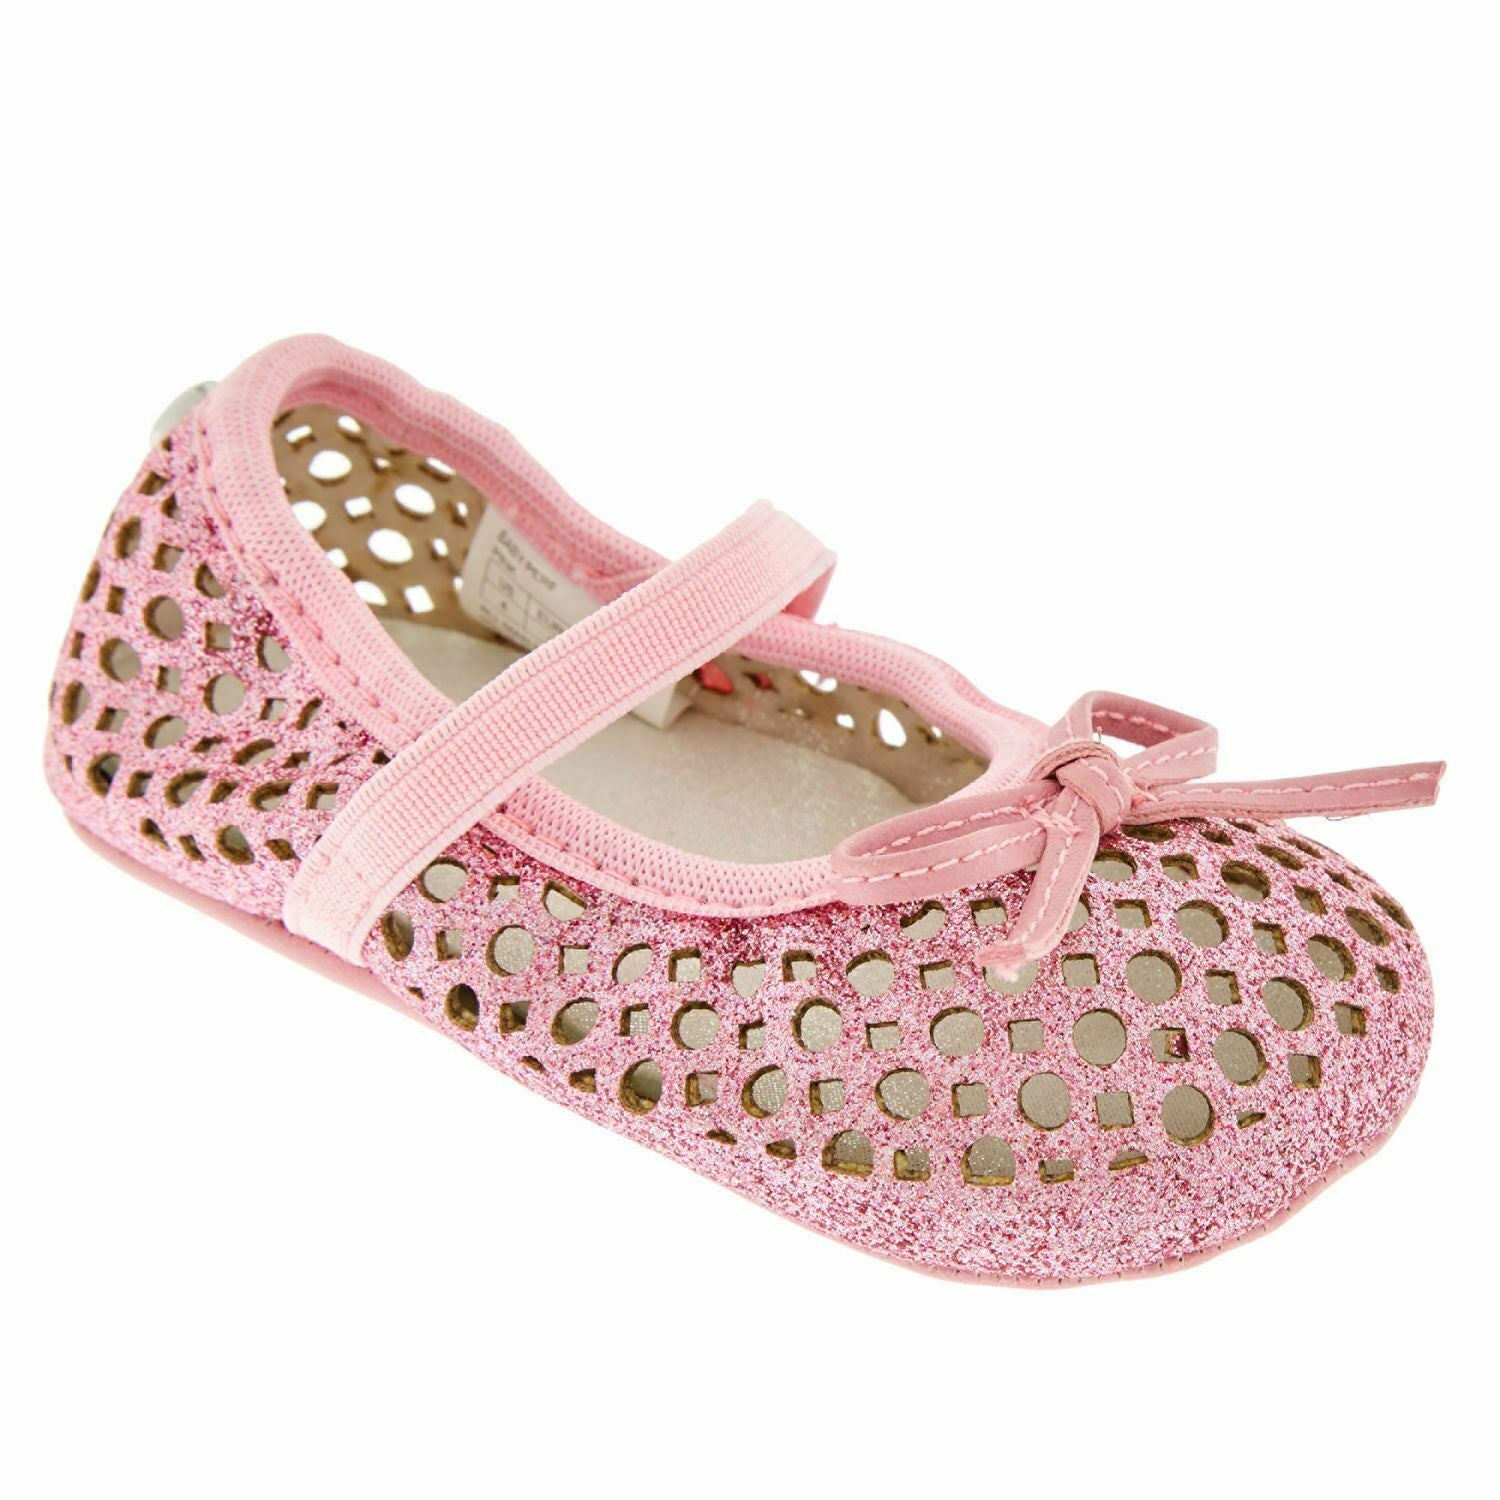 STUART WEITZMAN Perf Perf Baby Girls' Shoes, Pink, 3 m to 6 months